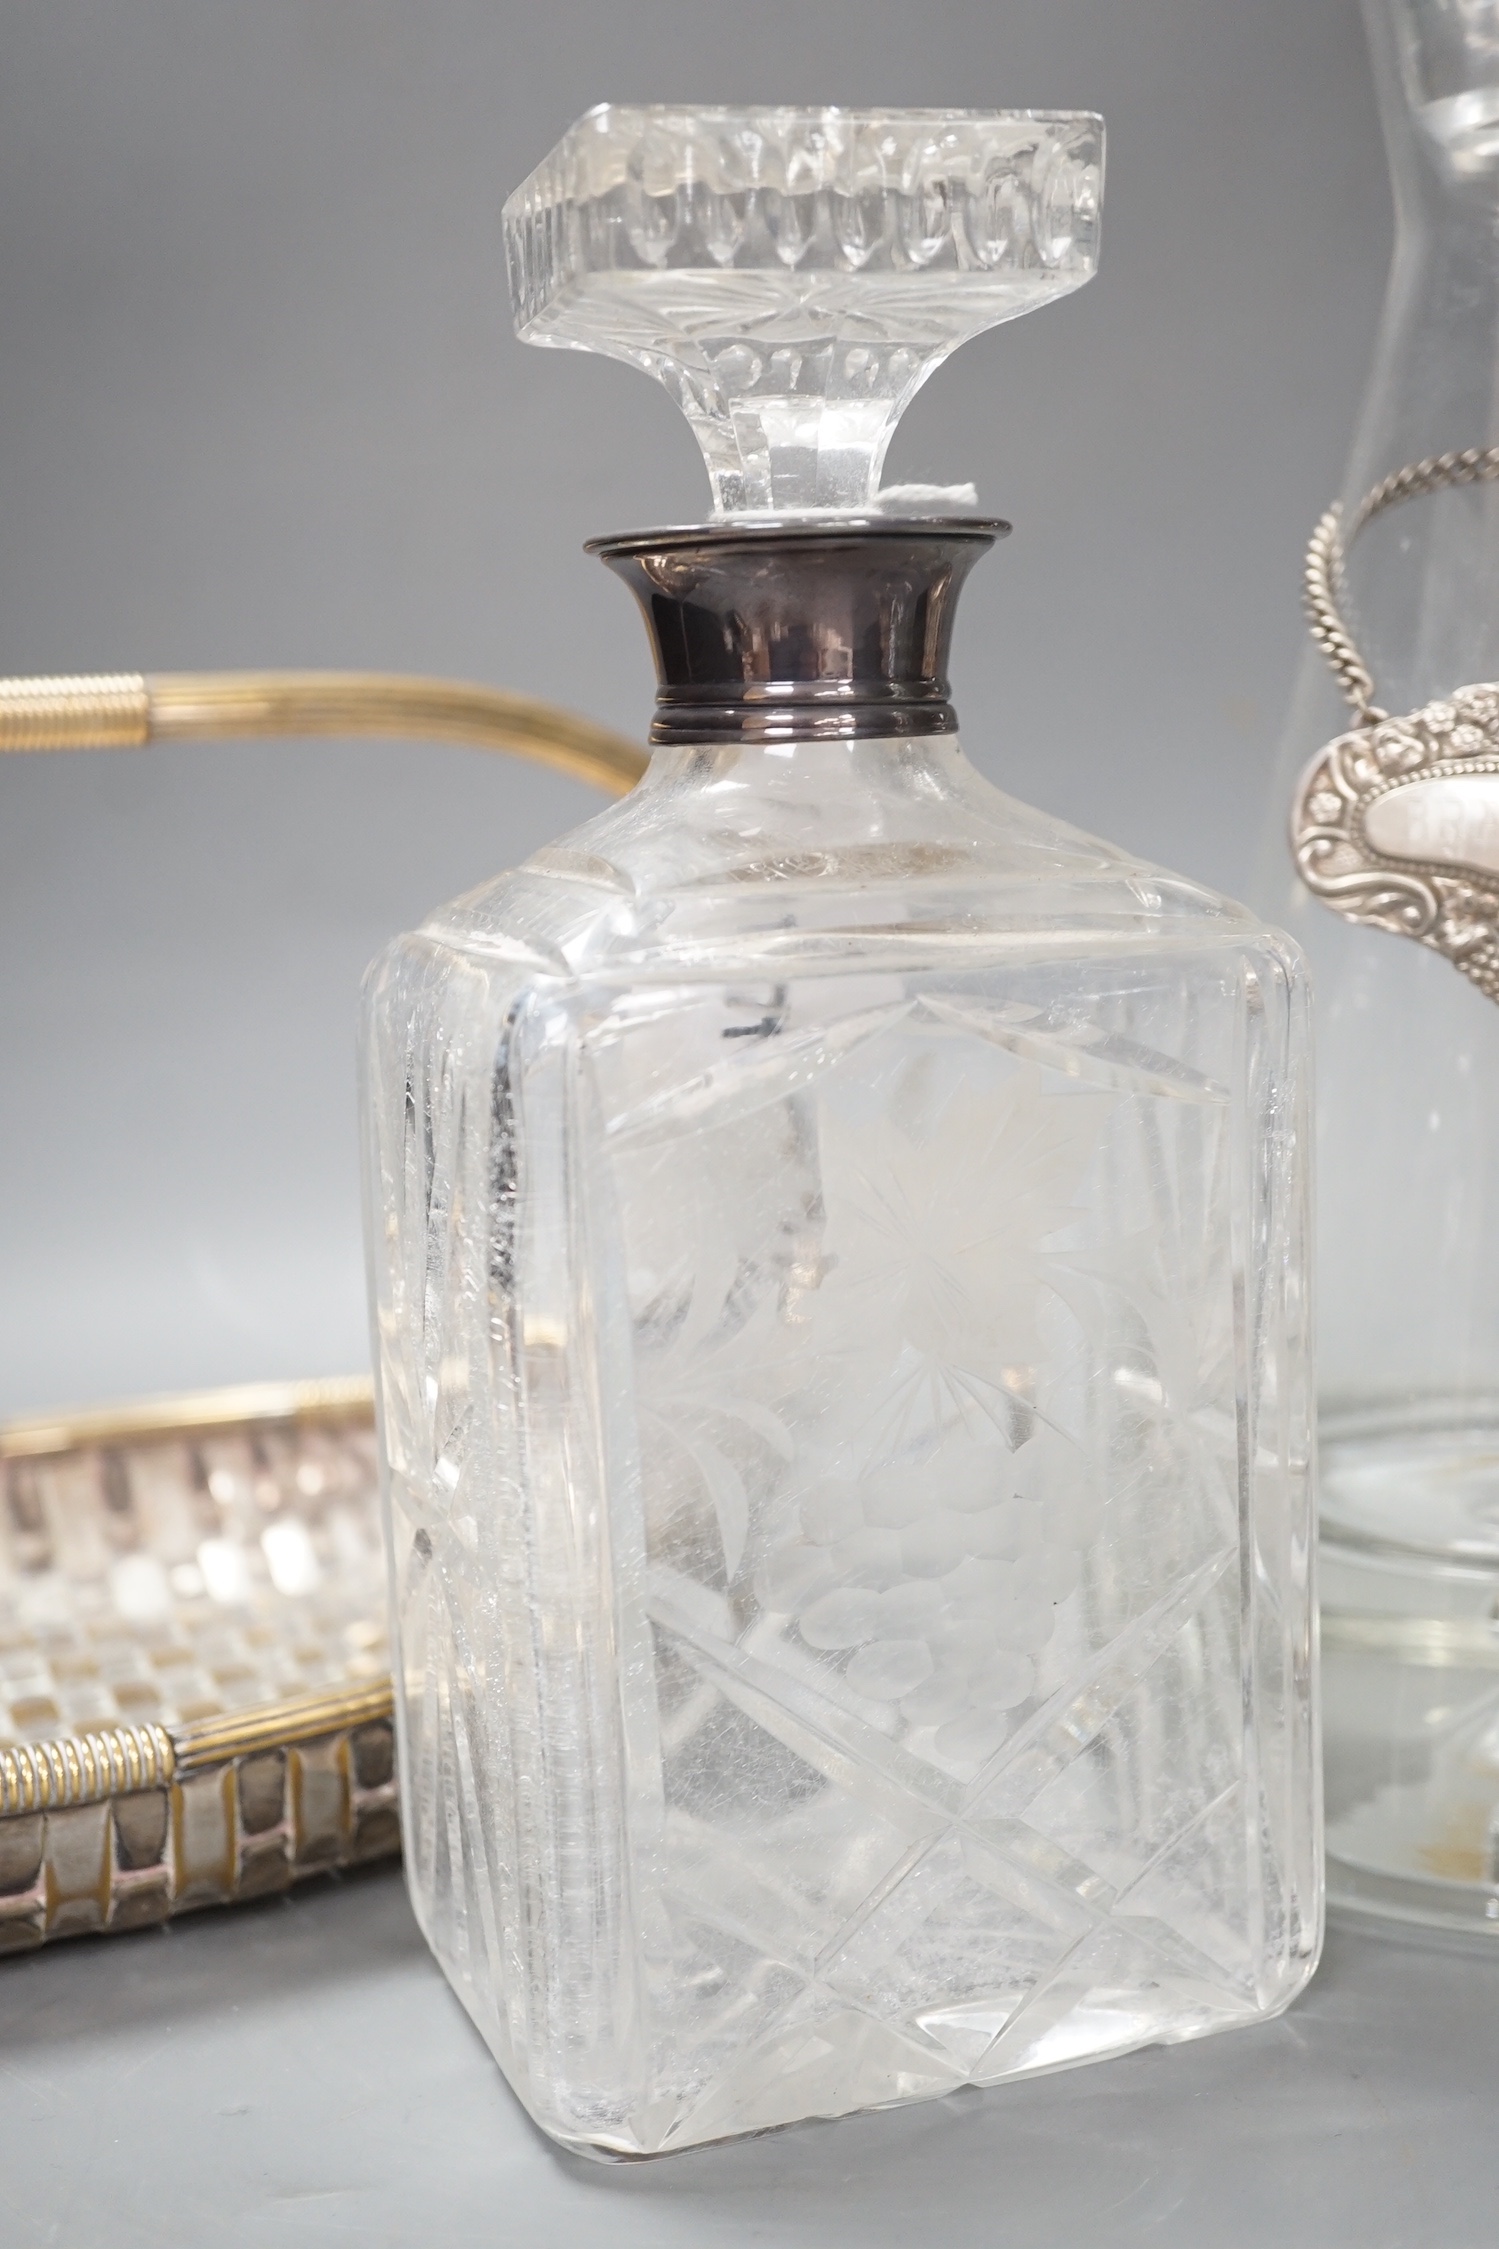 A silver topped decanter together with two other assorted decanters, a silver whisky label and a silver plated basket